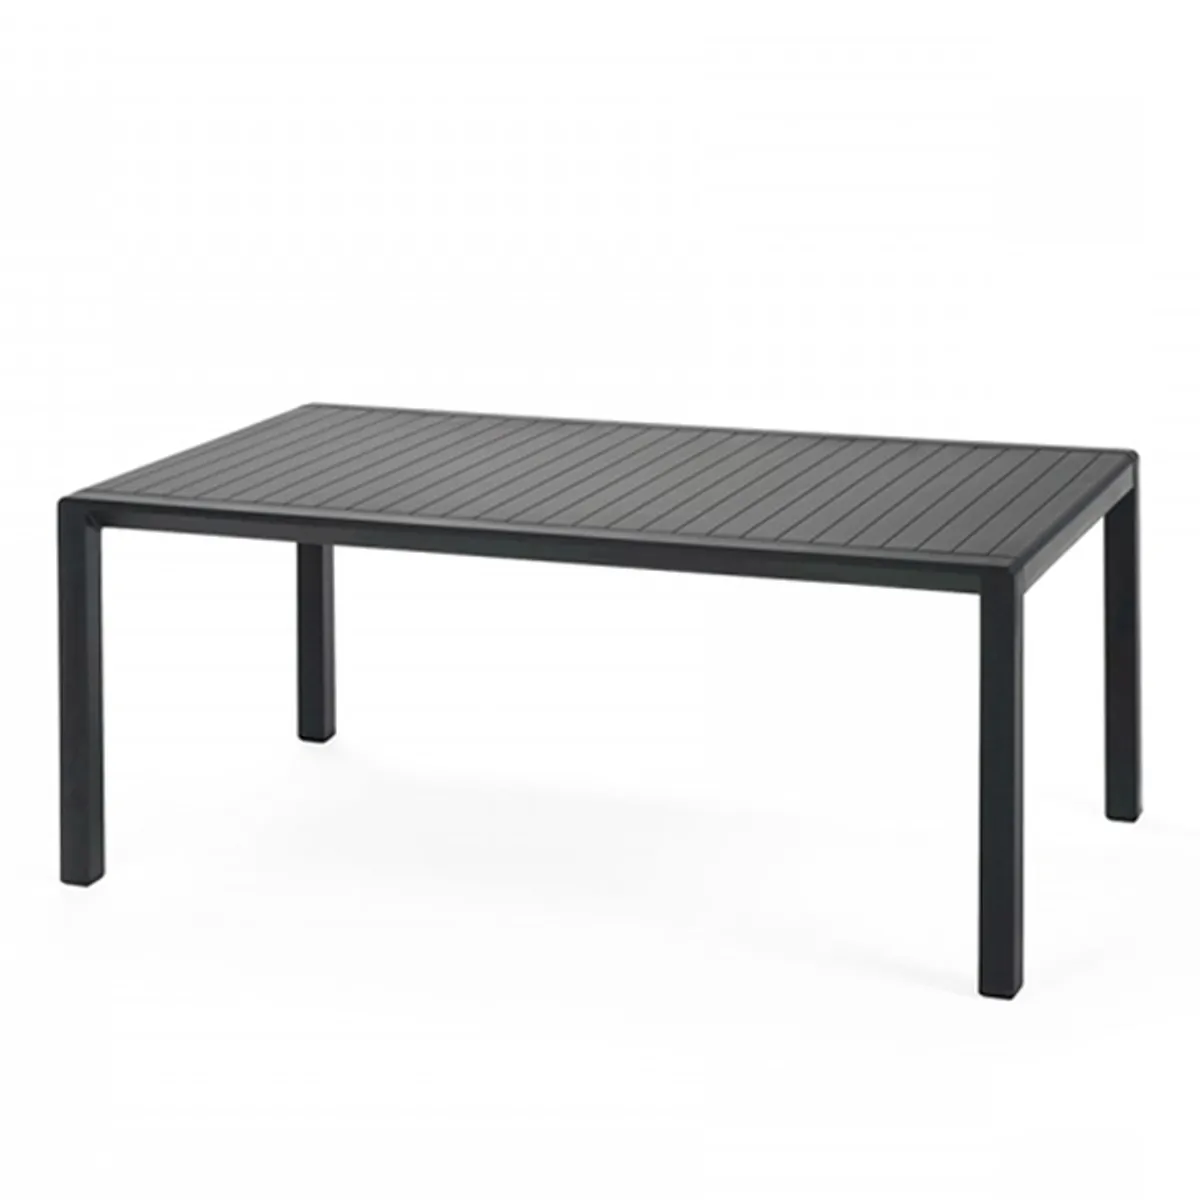 Aria tavolino coffee table Inside Out Contracts1